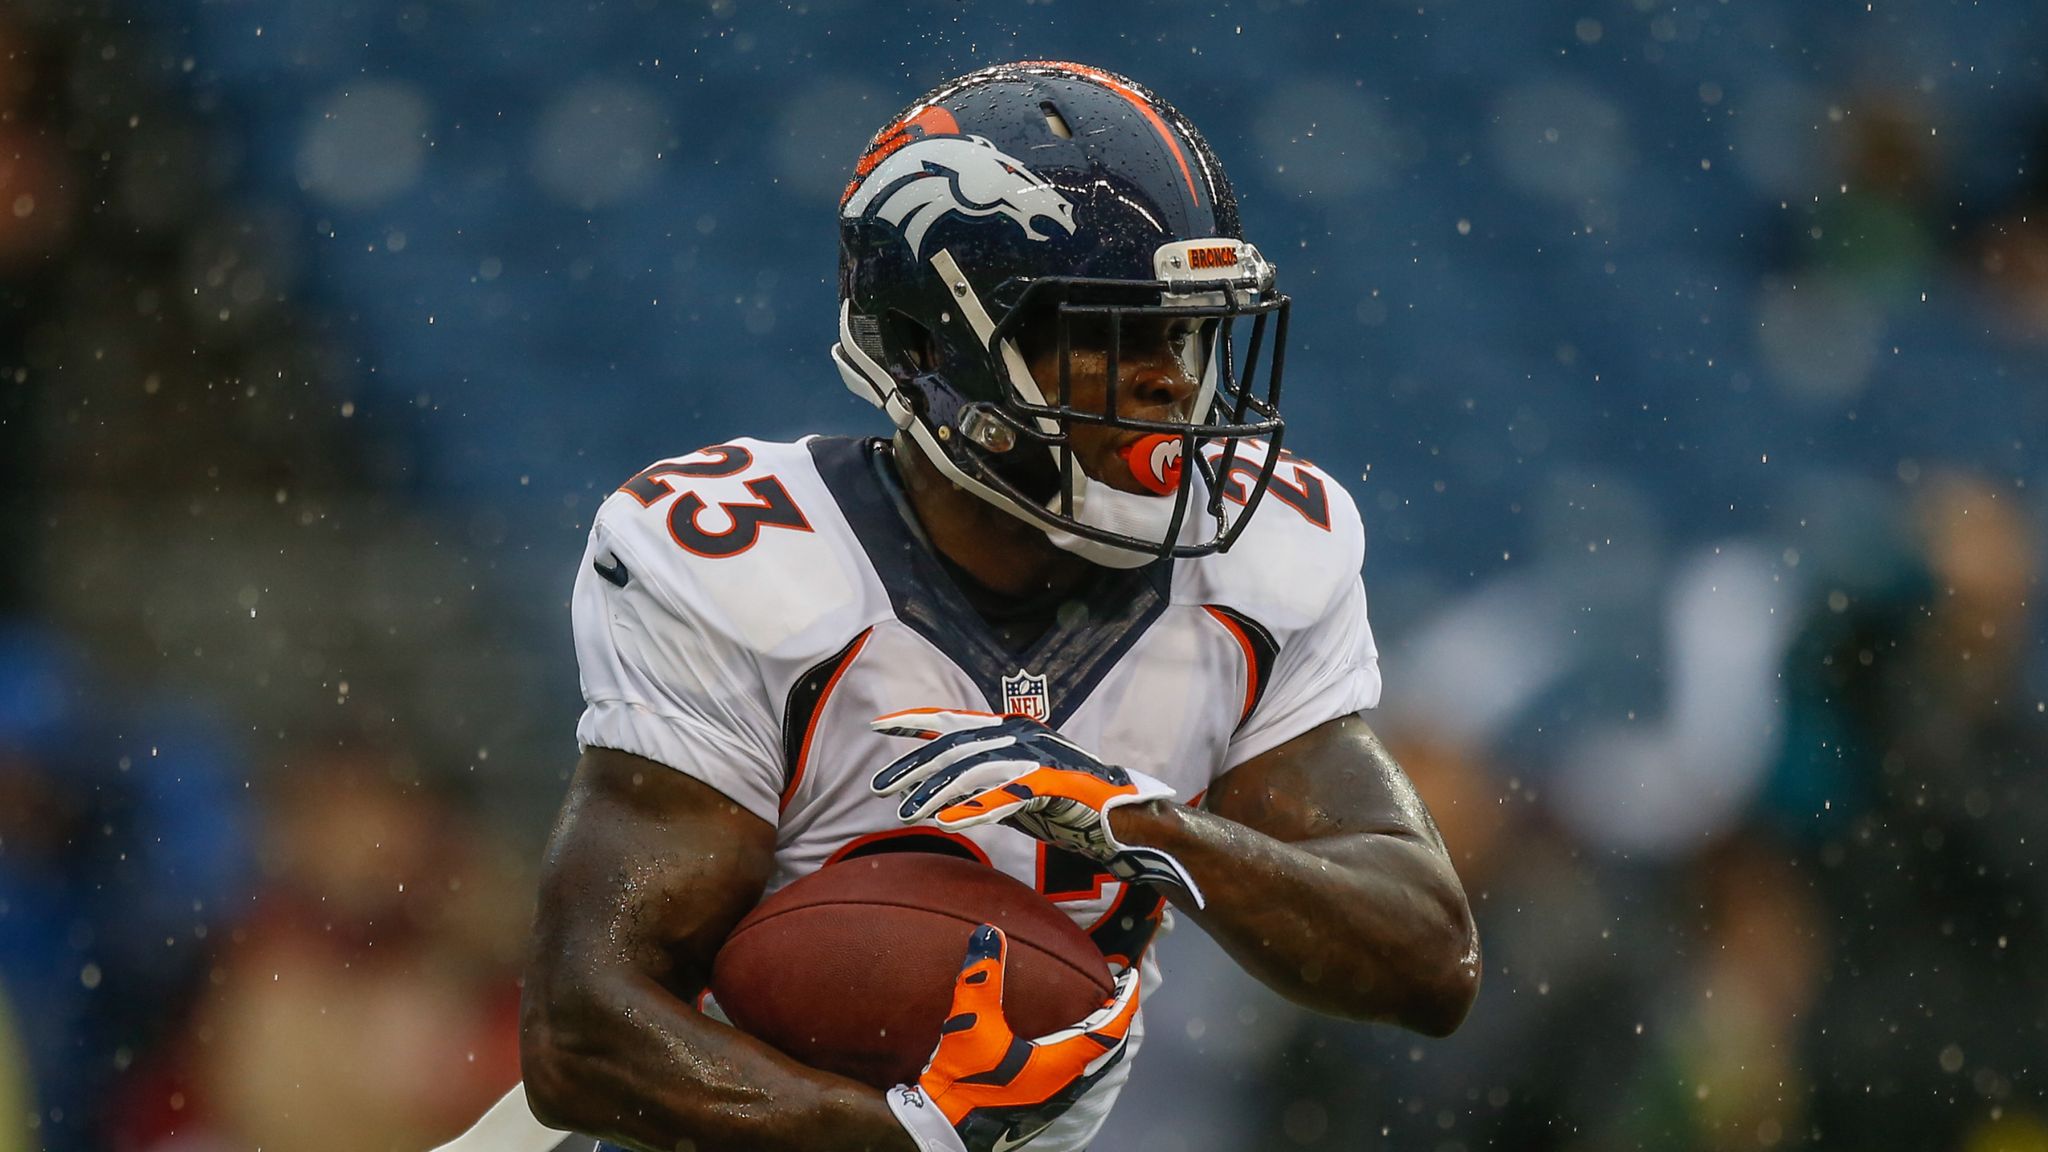 The Denver Broncos have re-signed running back Ronnie Hillman